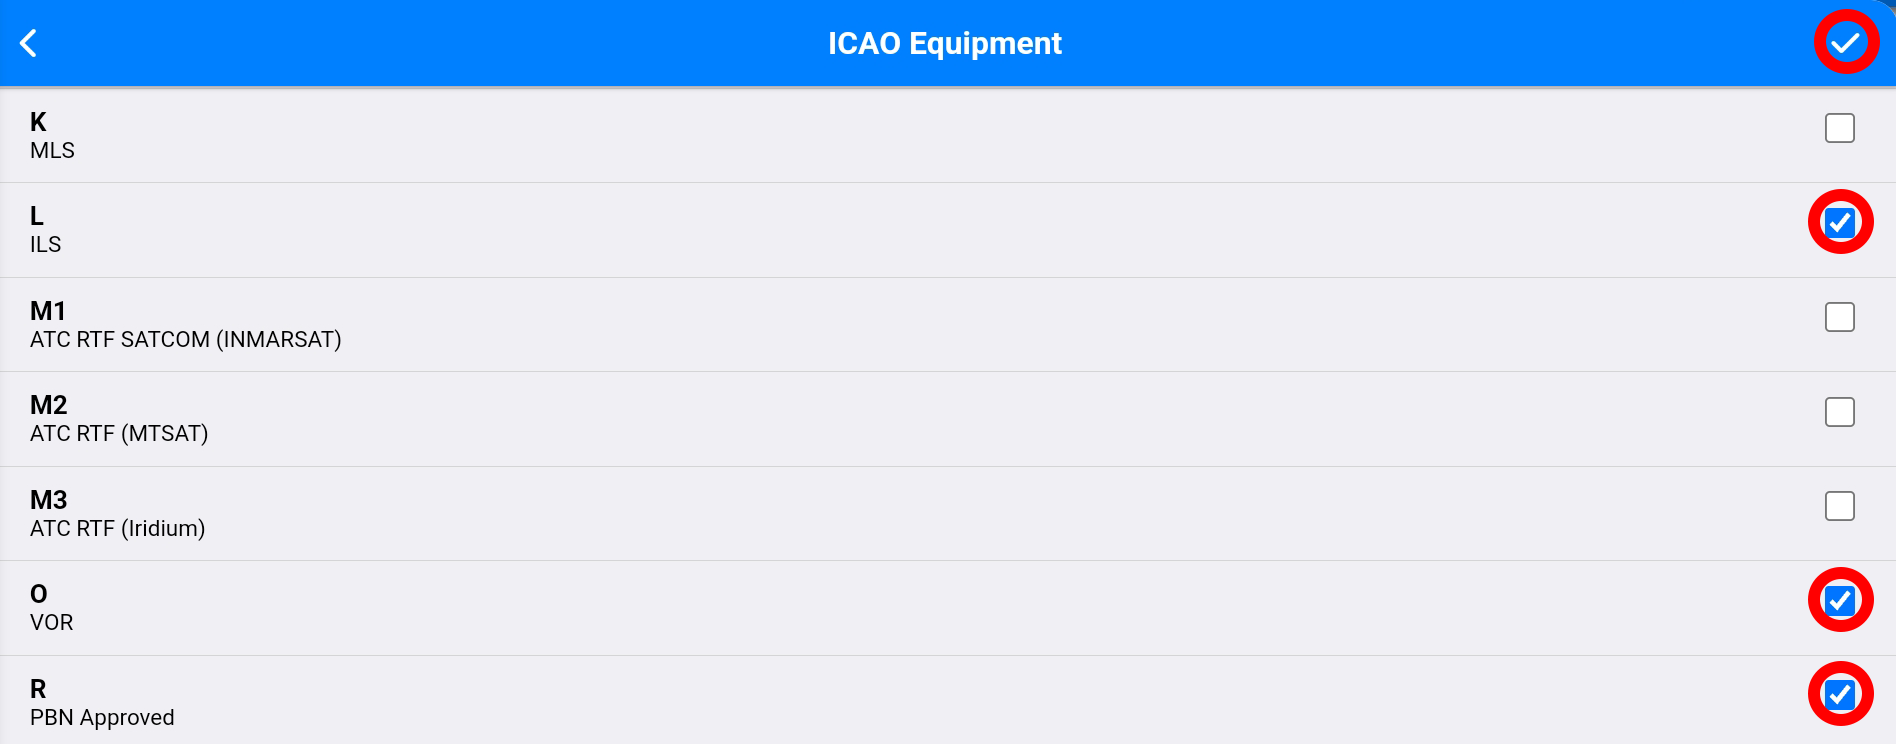 image of icao equipment